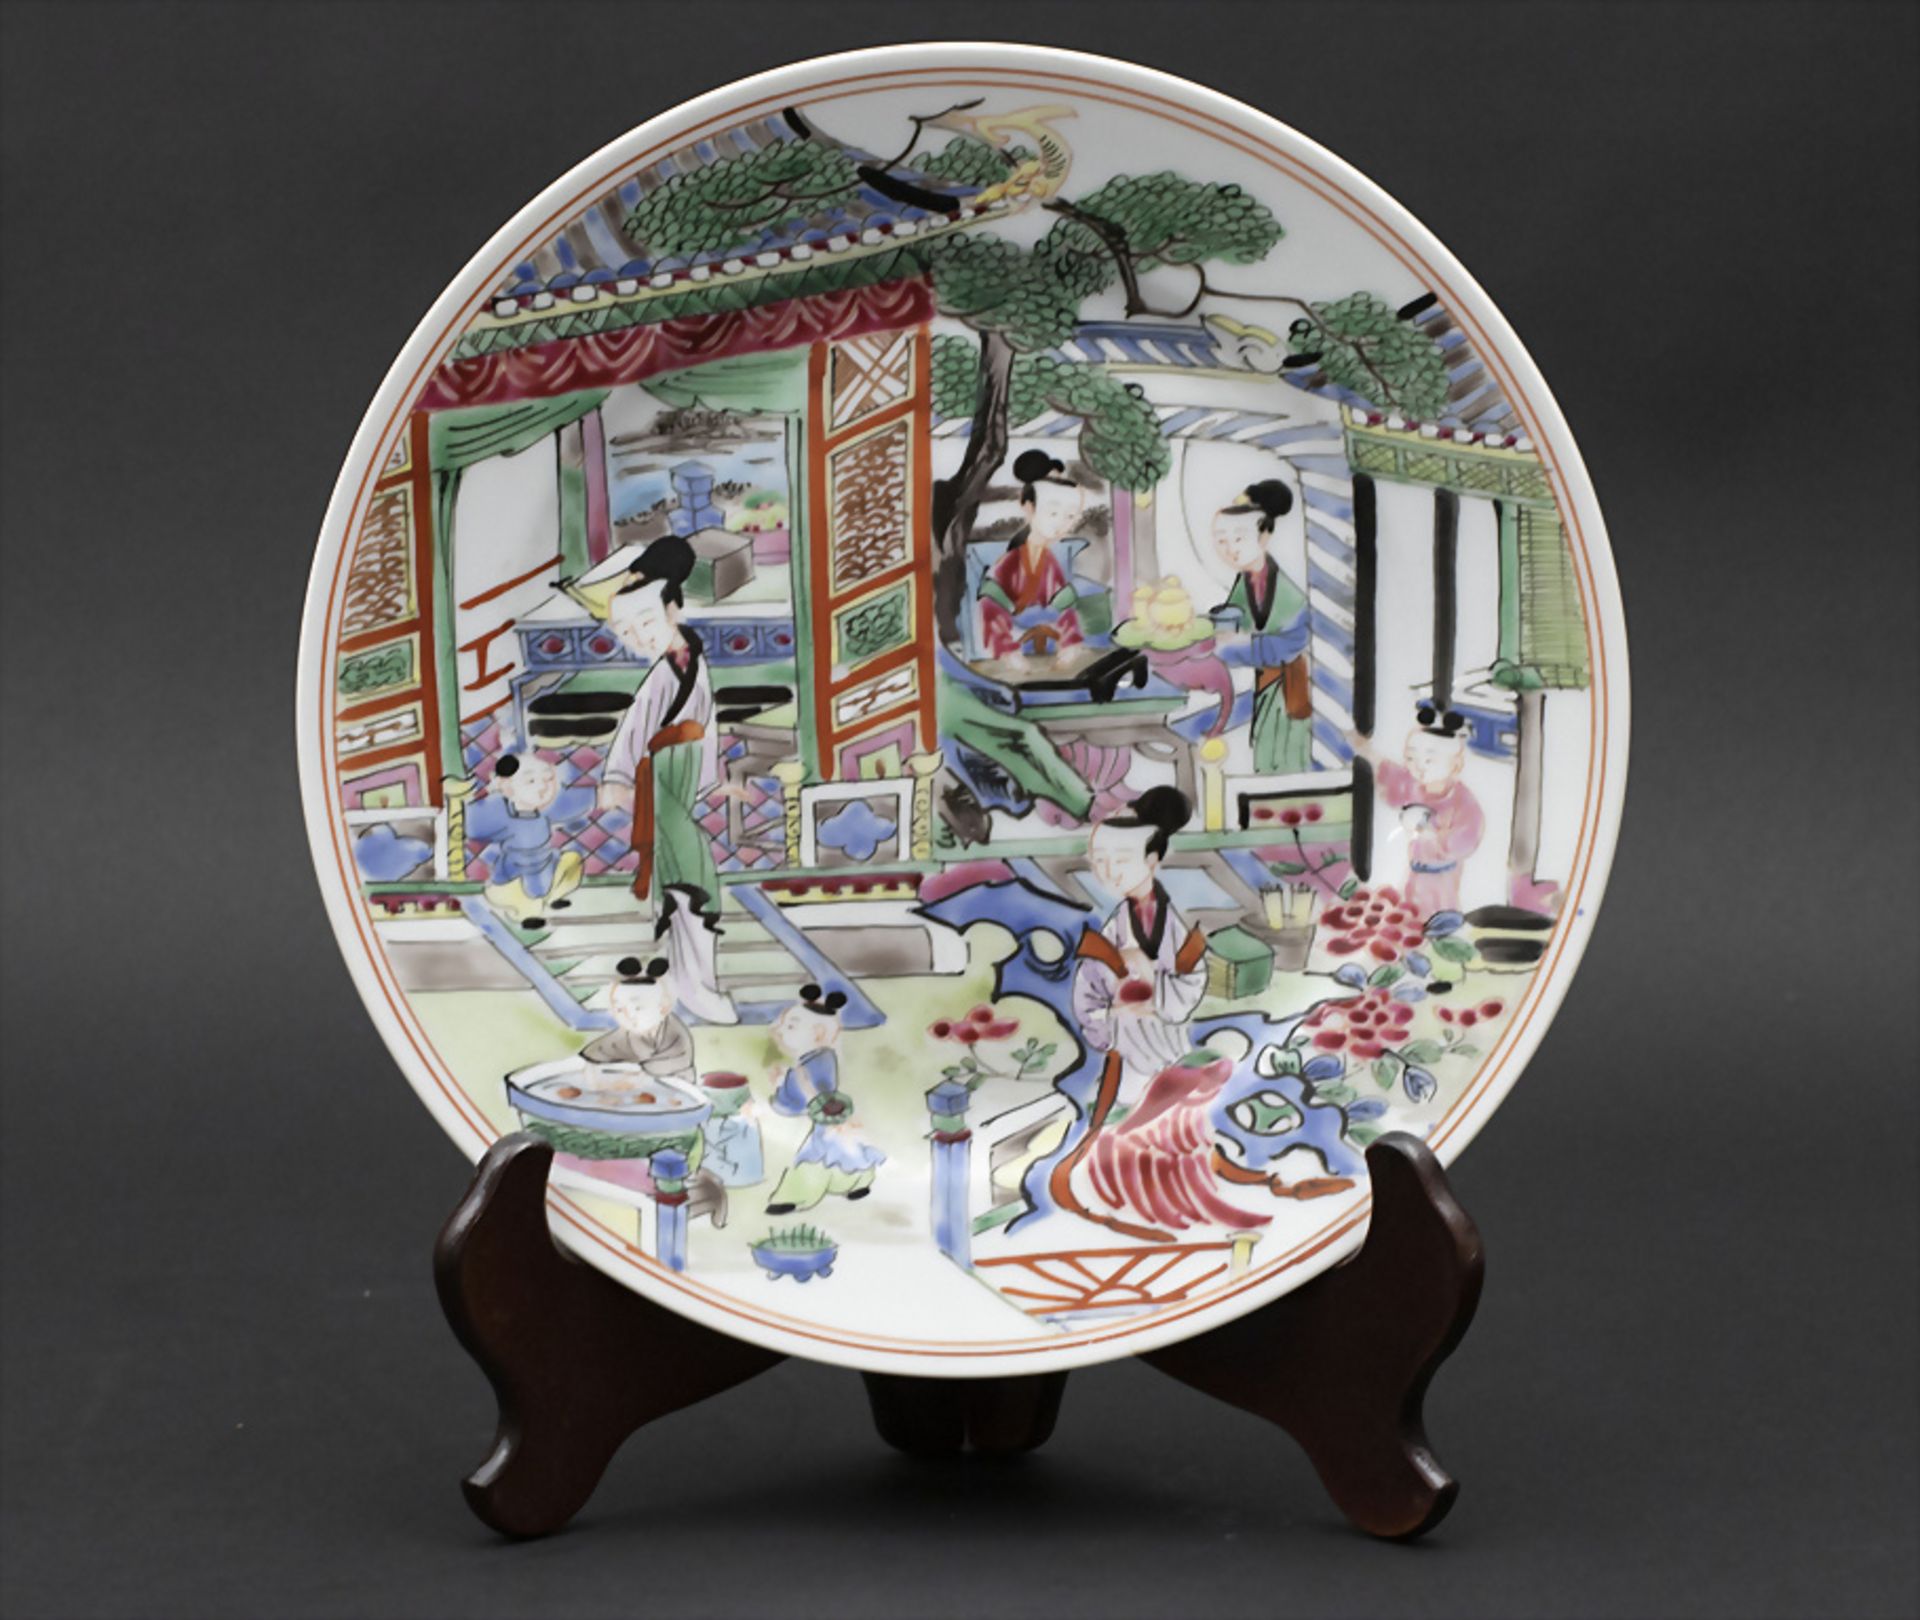 Teller / A porcelain plate, China, Qing Dynastie (1644-1911), Ende 19. Jh.